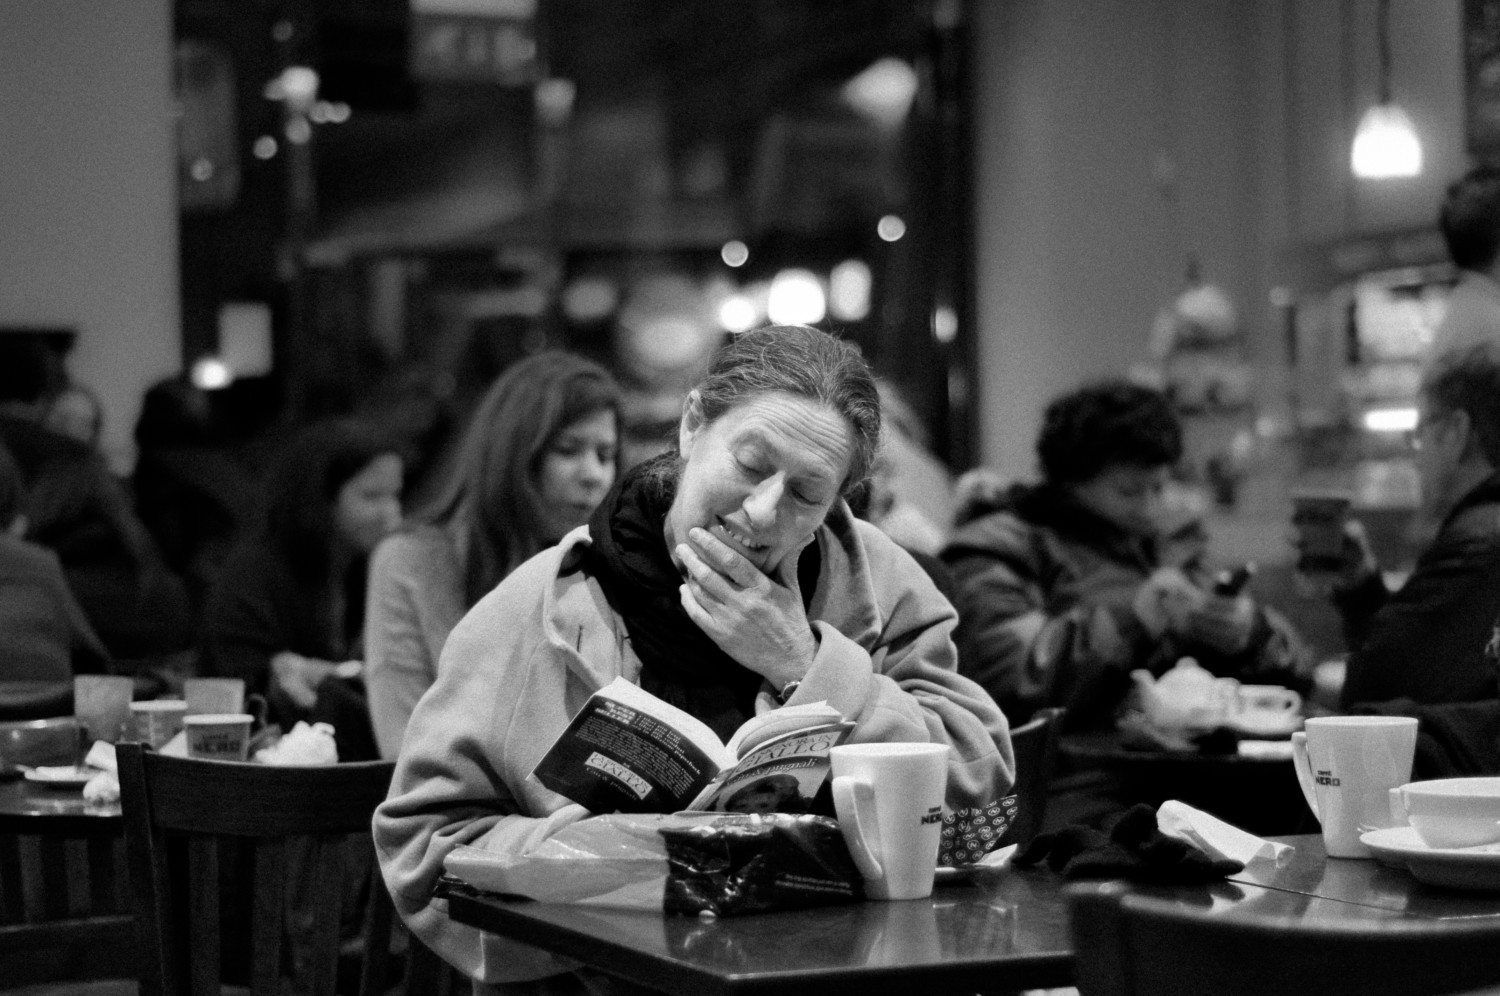 A woman reads a book in a coffee shop